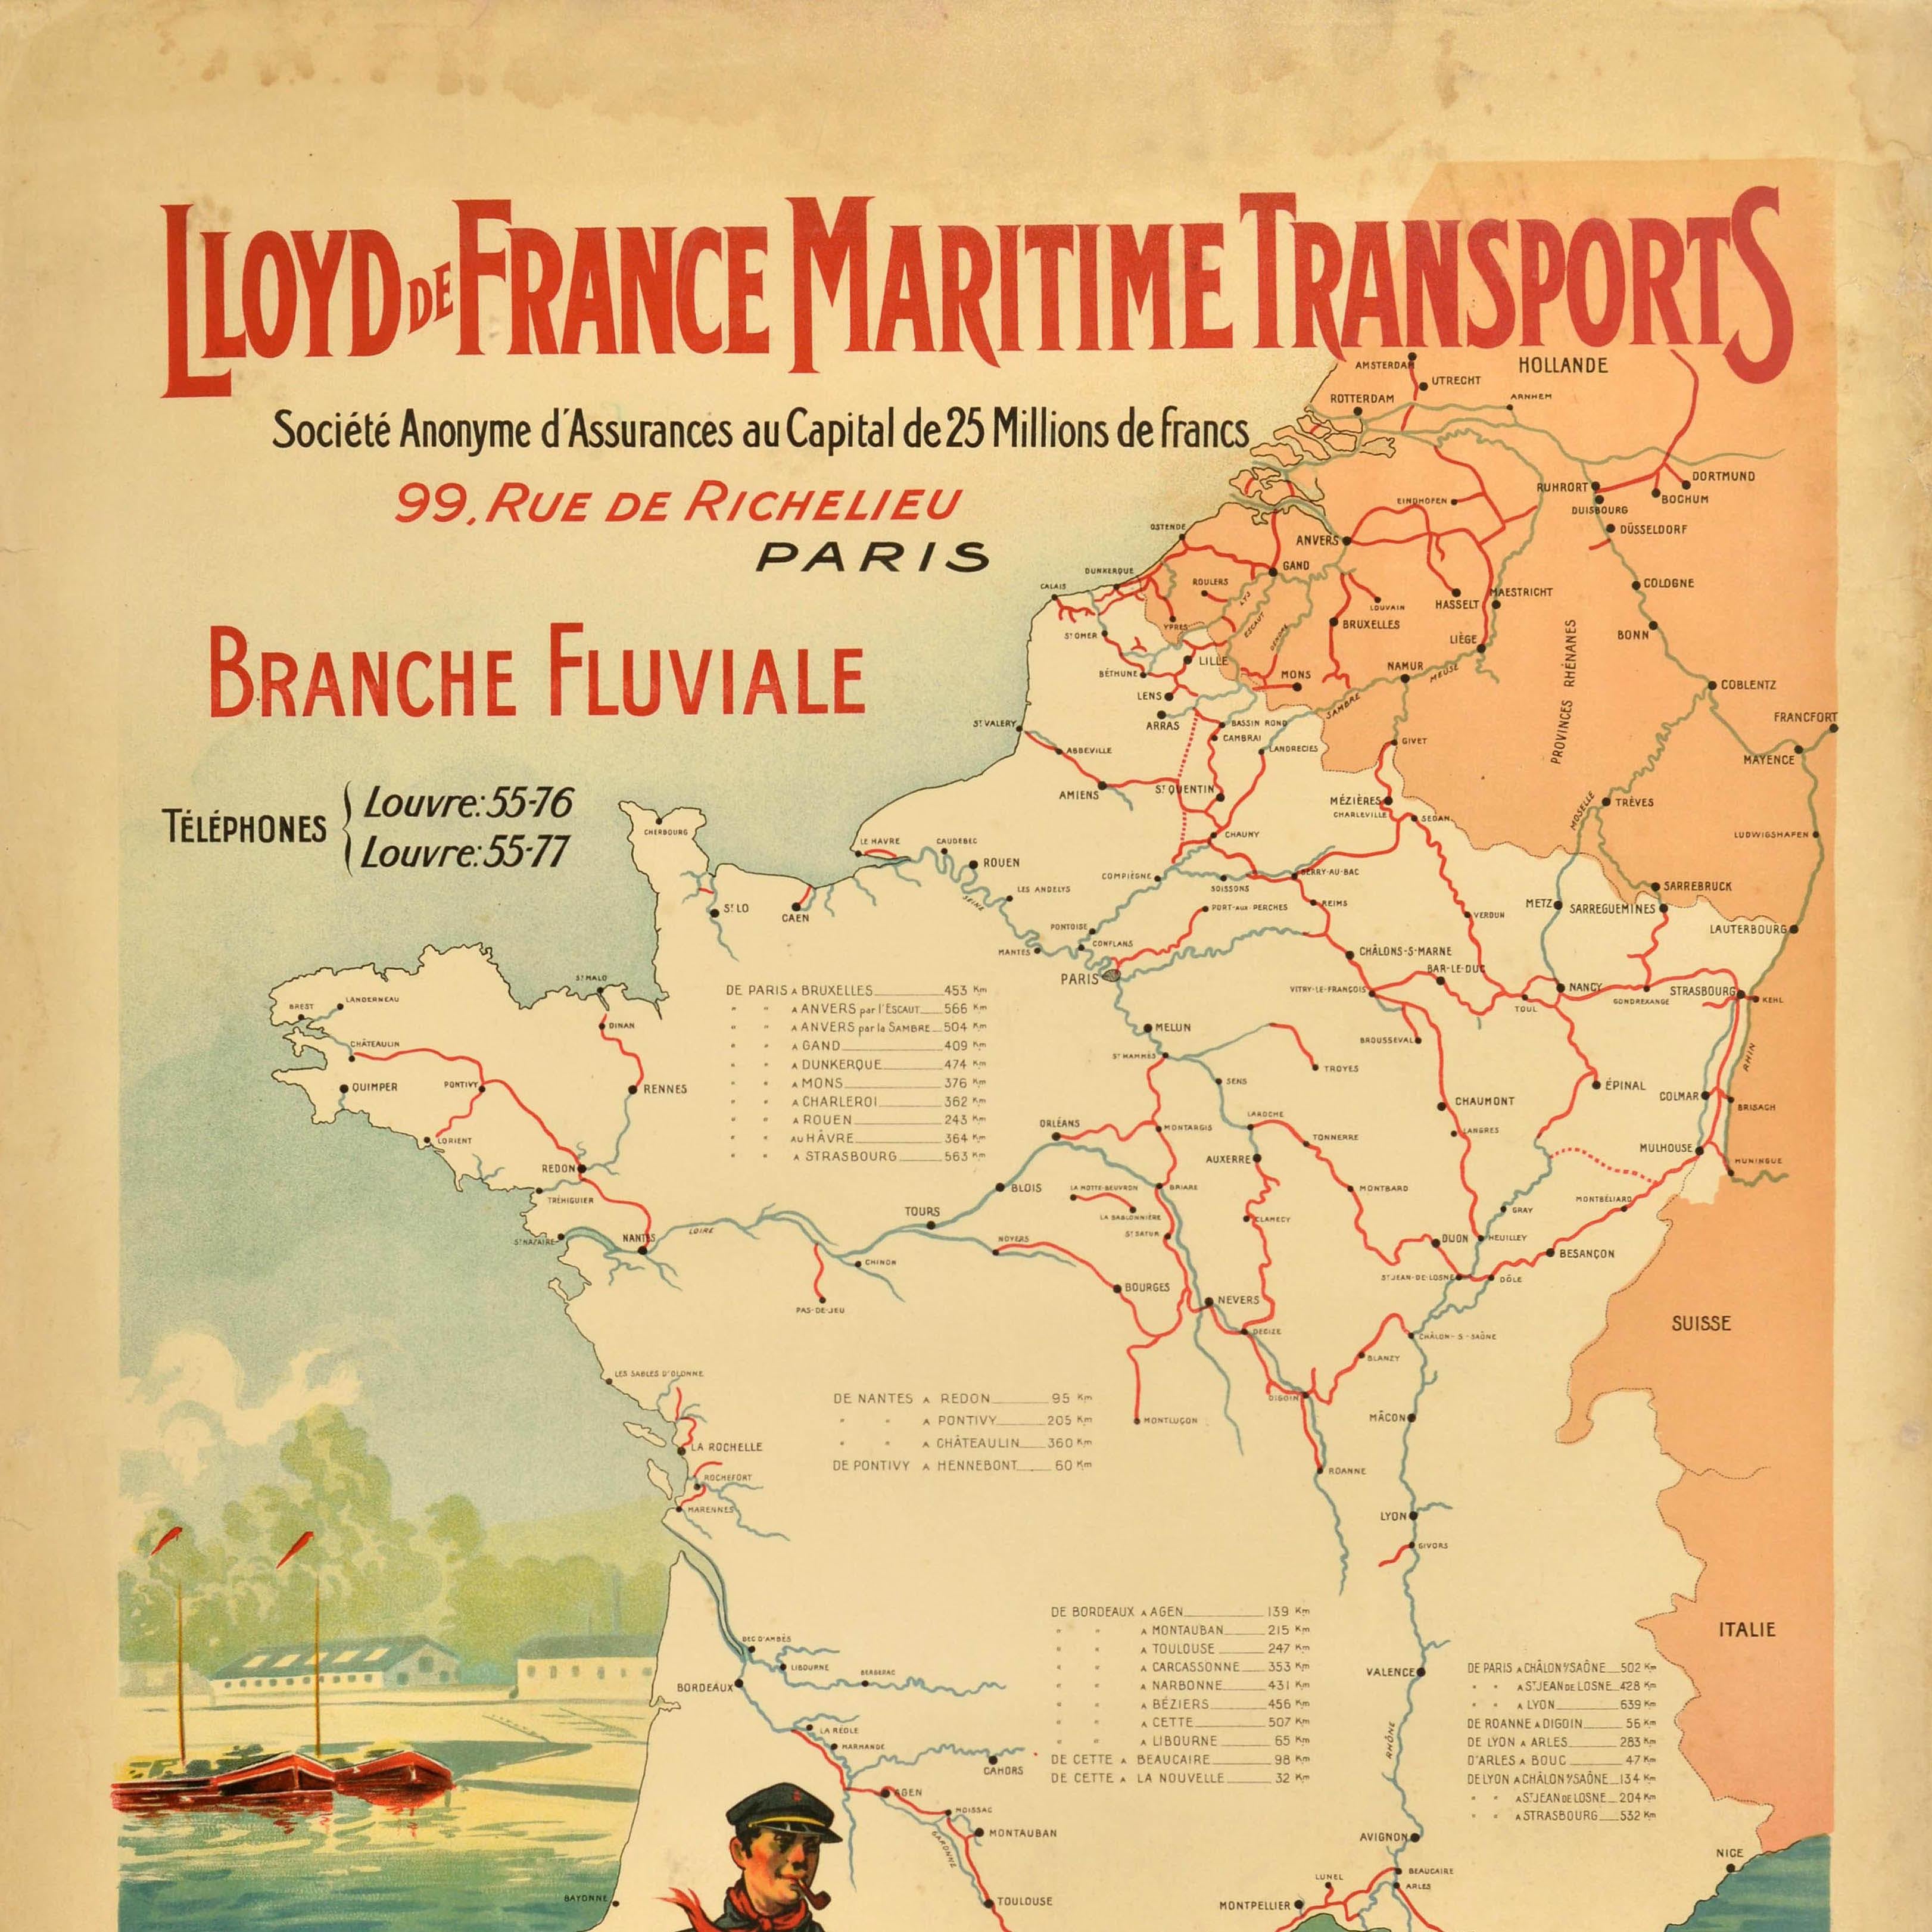 Original Antique Advertising Poster Lloyds France Maritime Transports Insurance - Orange Print by Unknown